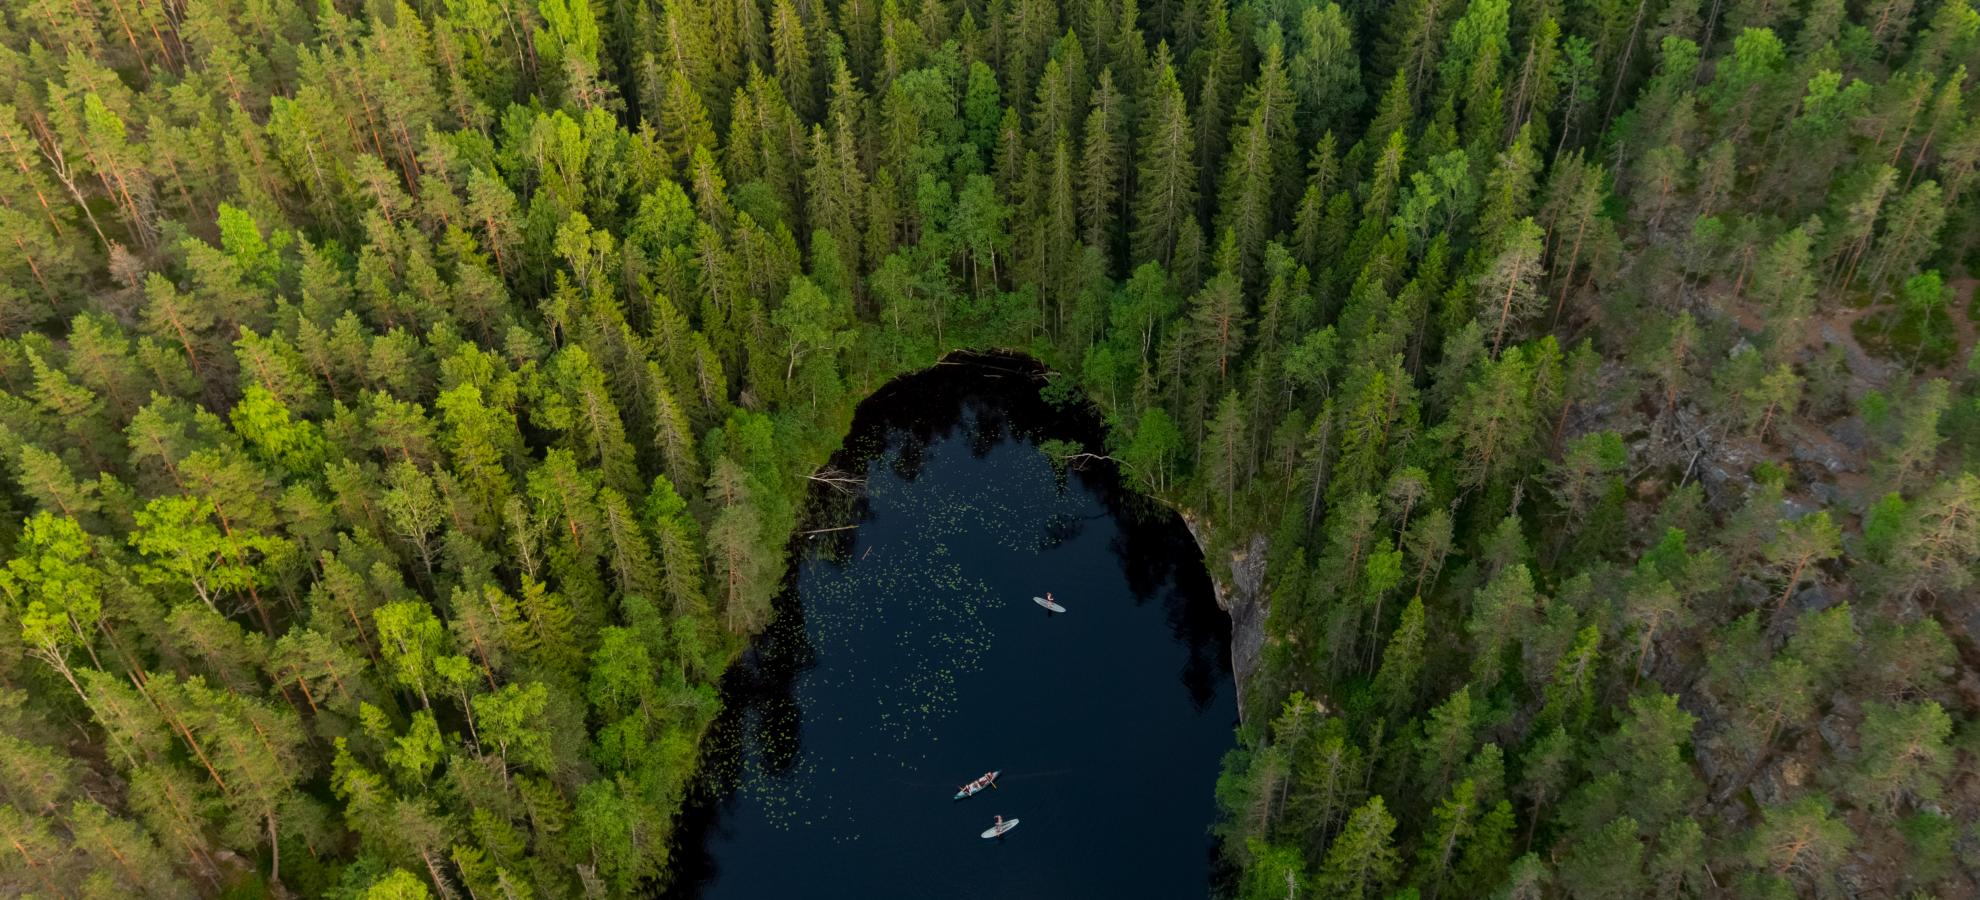 Aerial view of a small, dark lake shaped like a thumbprint, surrounded by trees in Nuuksio national park.